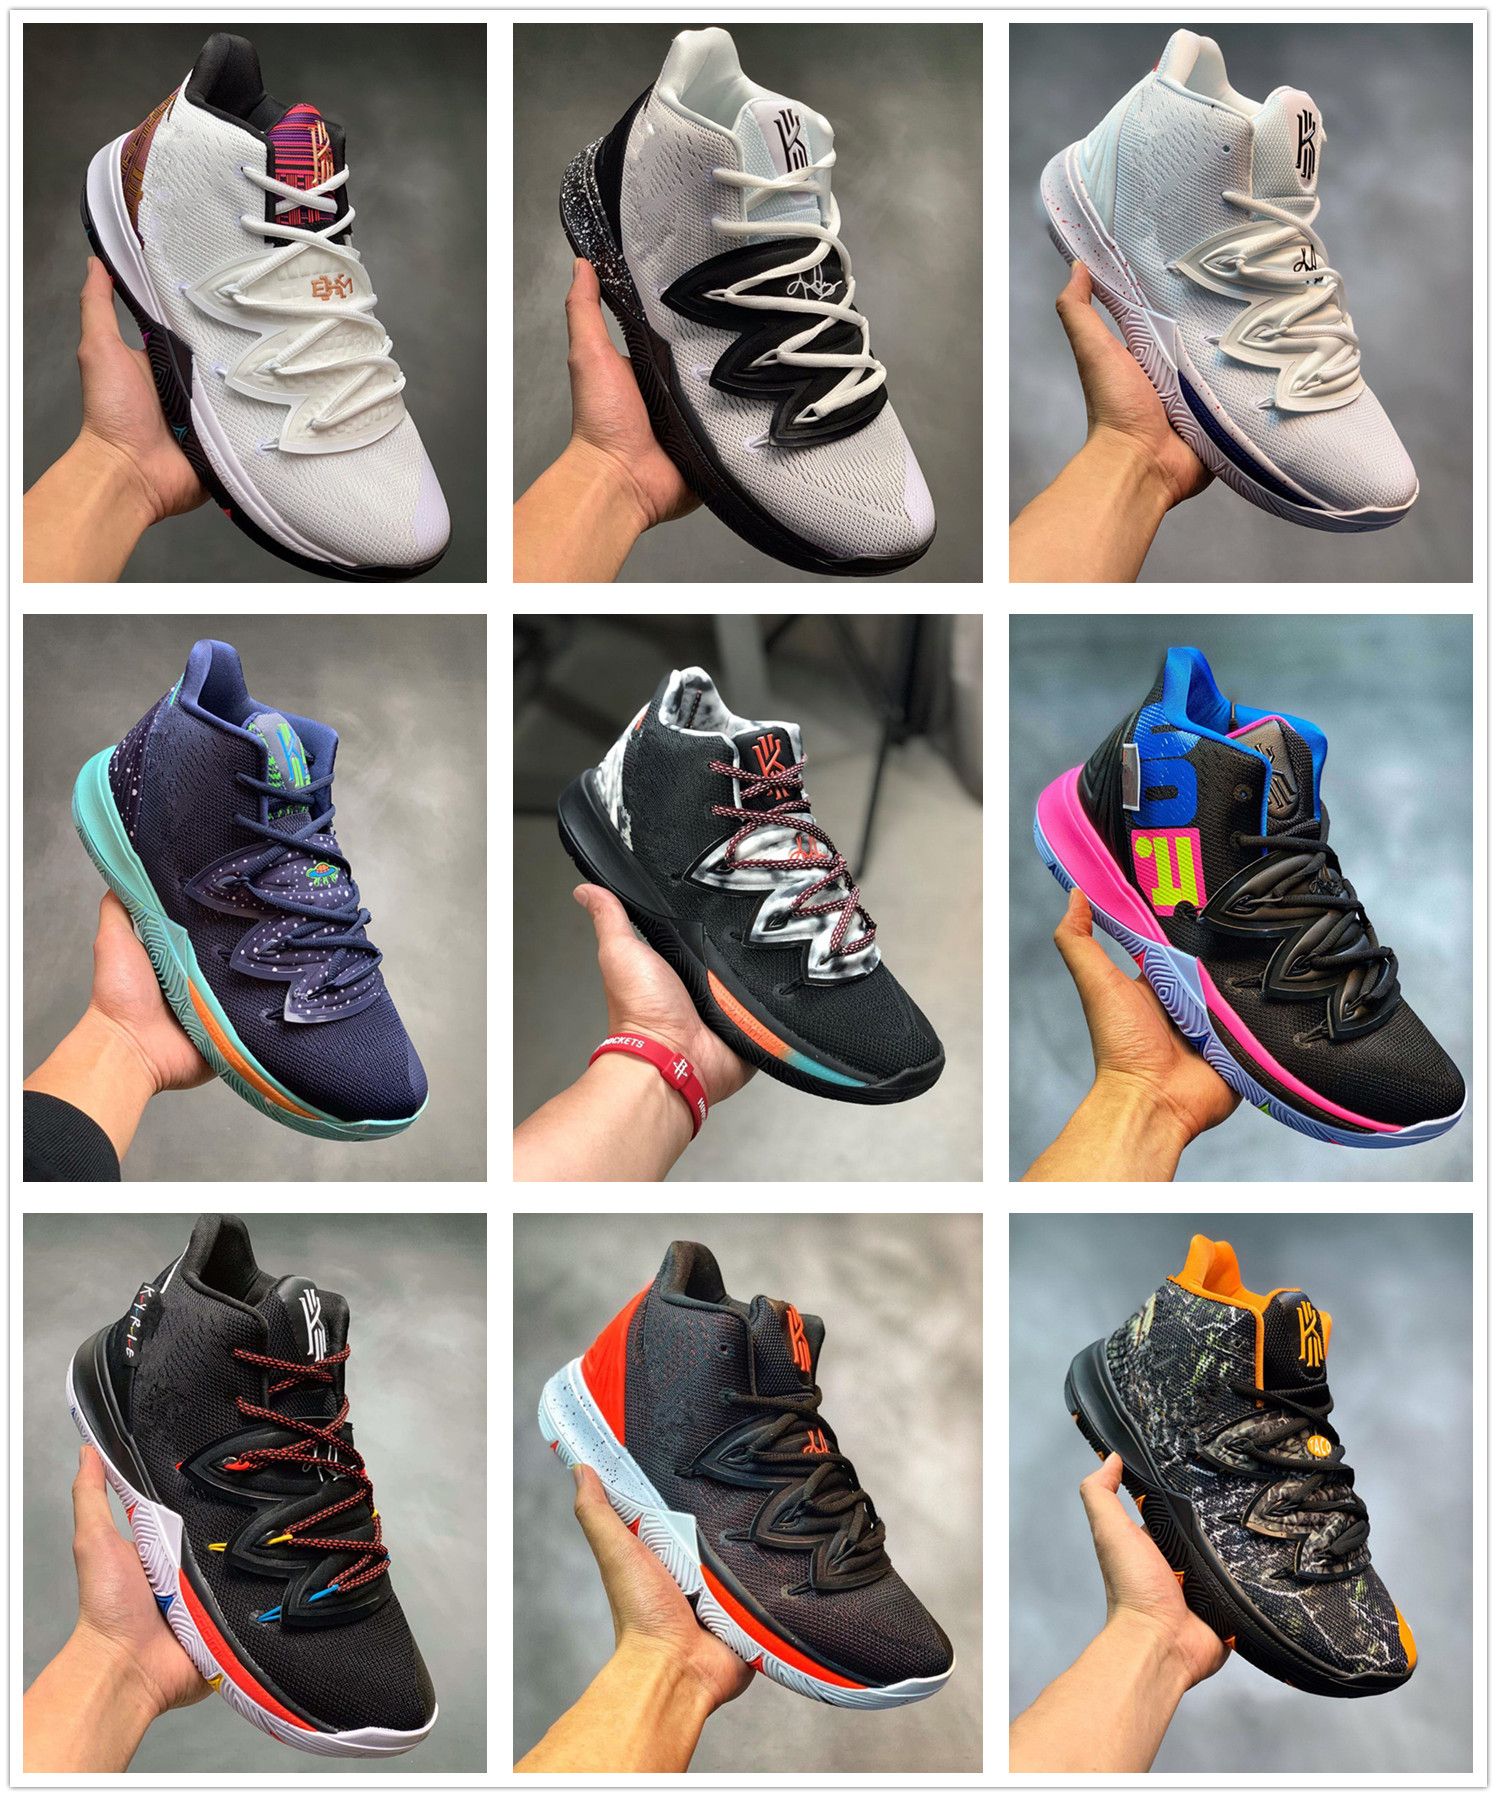 Nike Kyrie 5 Shoes Mens Kyrie Irving Sneakers SD5 Cheap